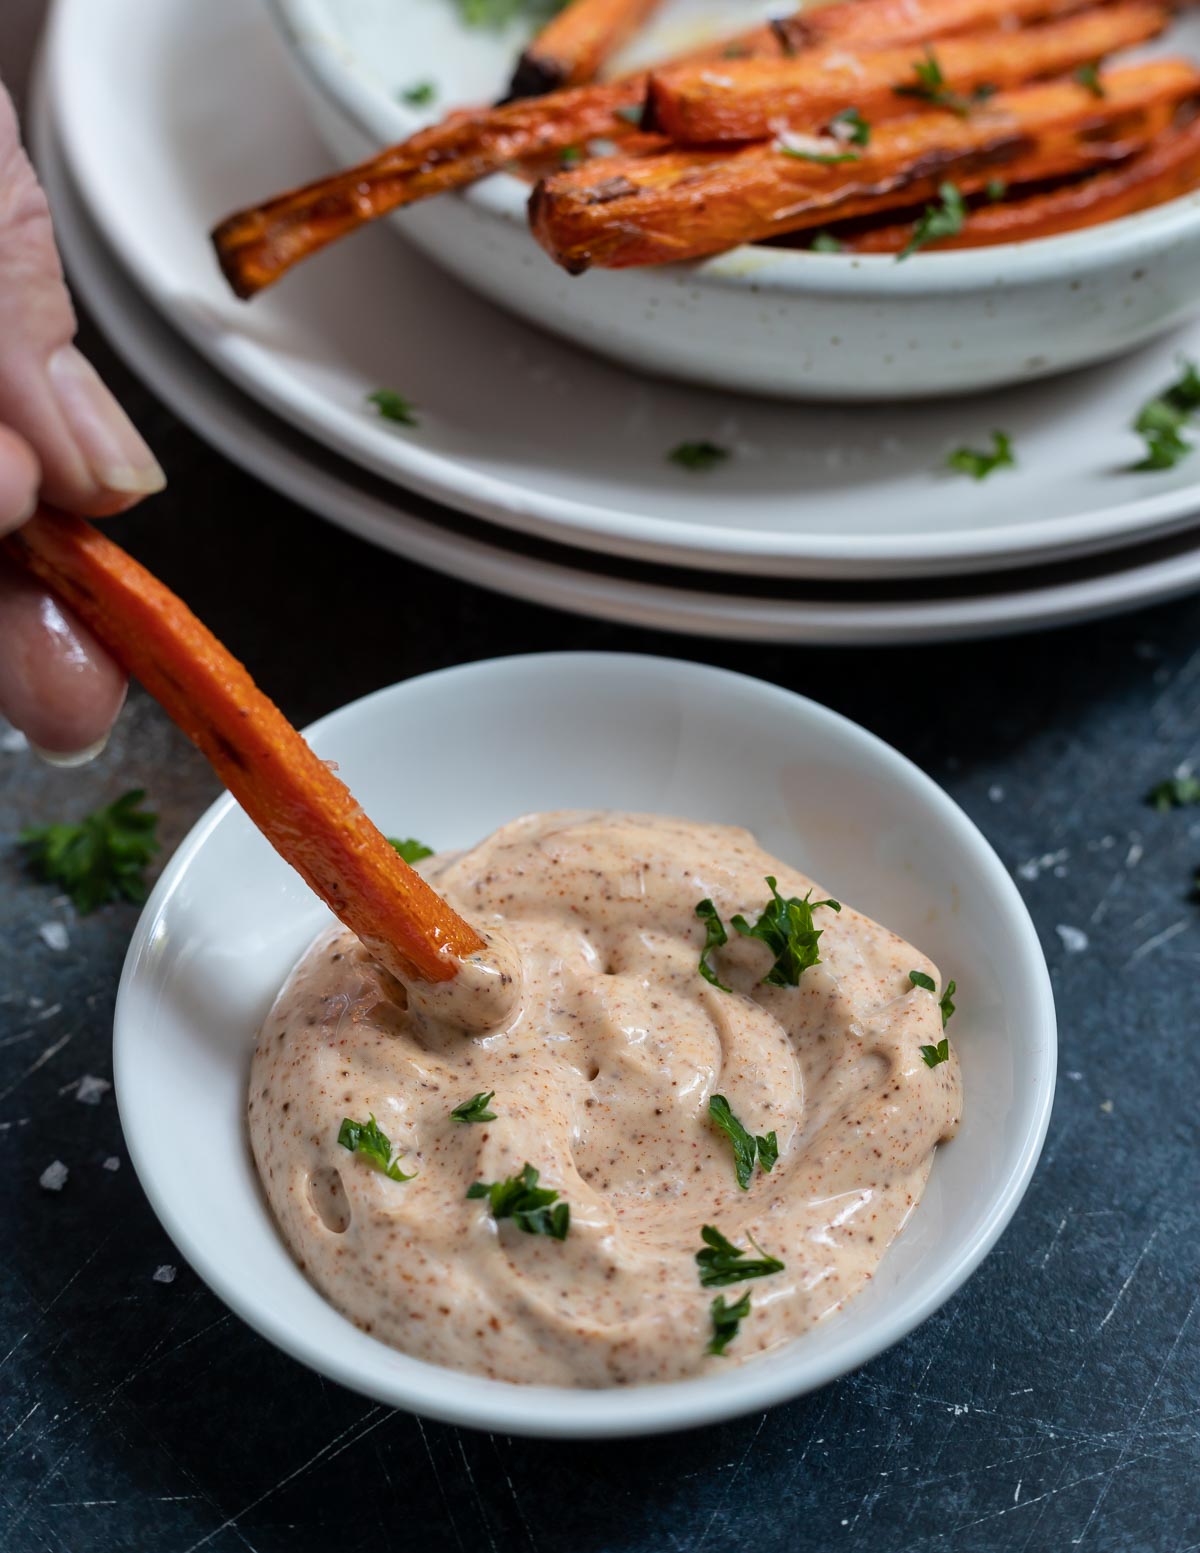 hand dipping carrot fry into dip